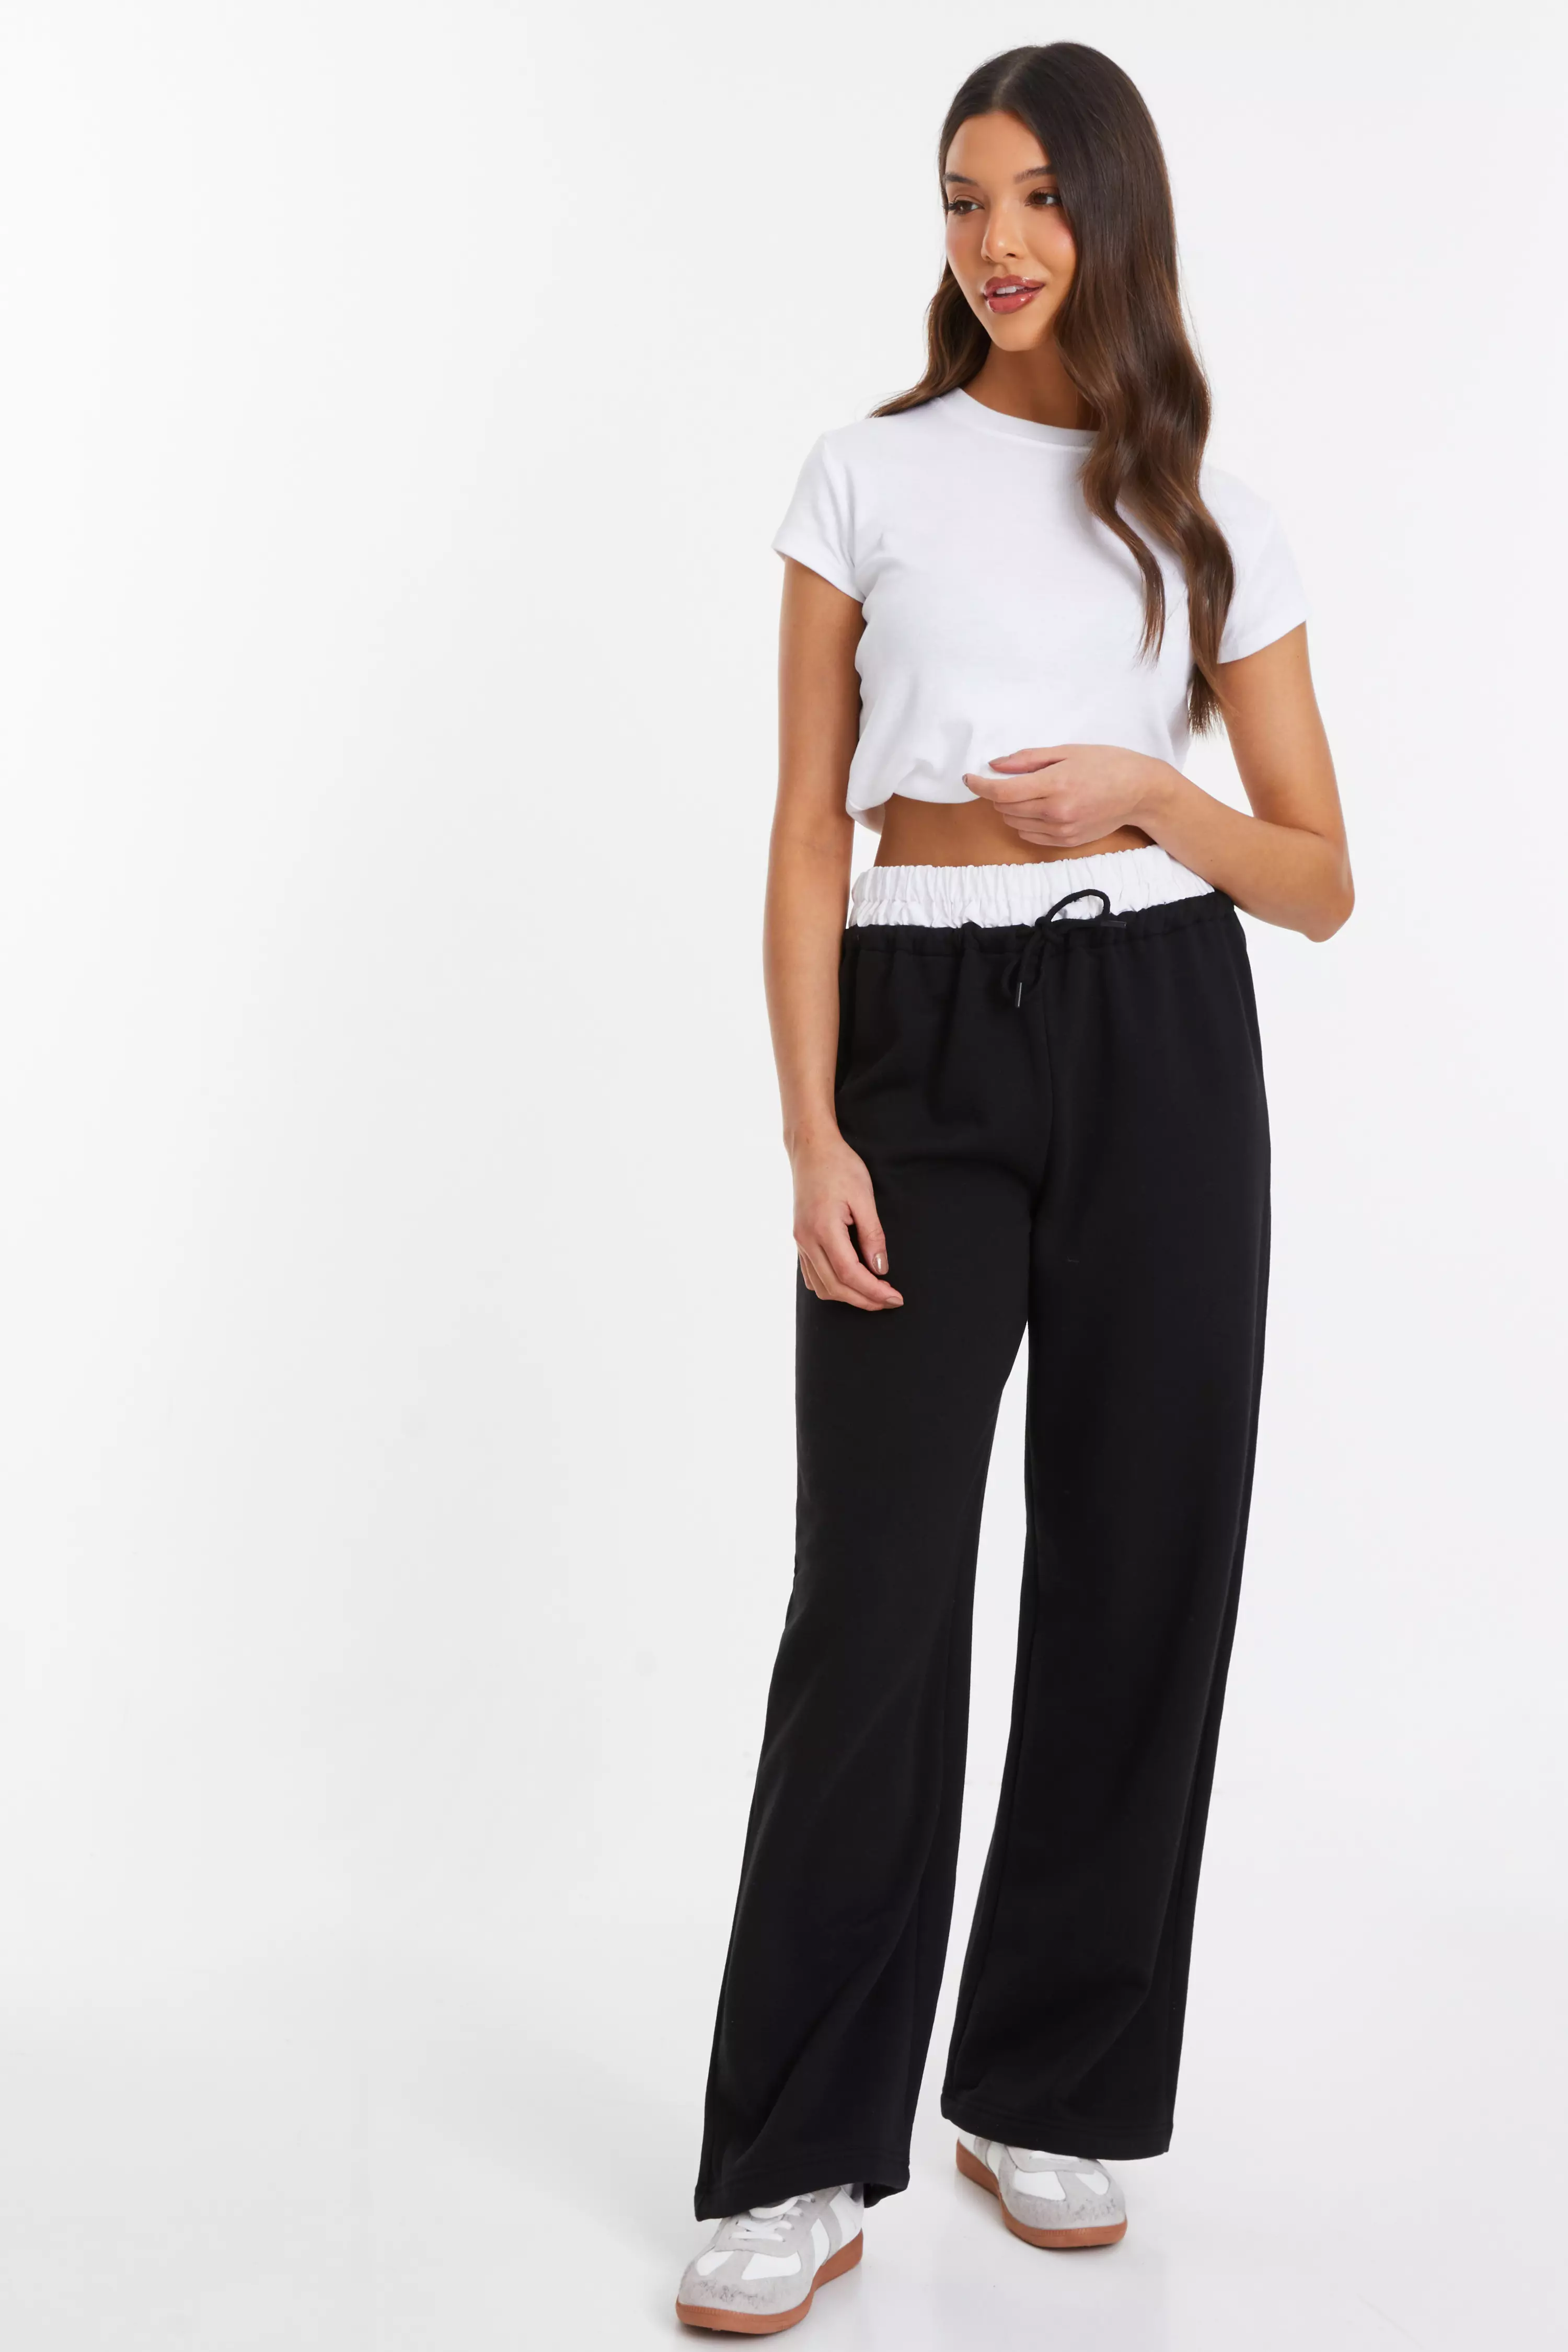 Womens Trousers | Ladies Cropped, Wide Leg & High Waisted Trousers | QUIZ